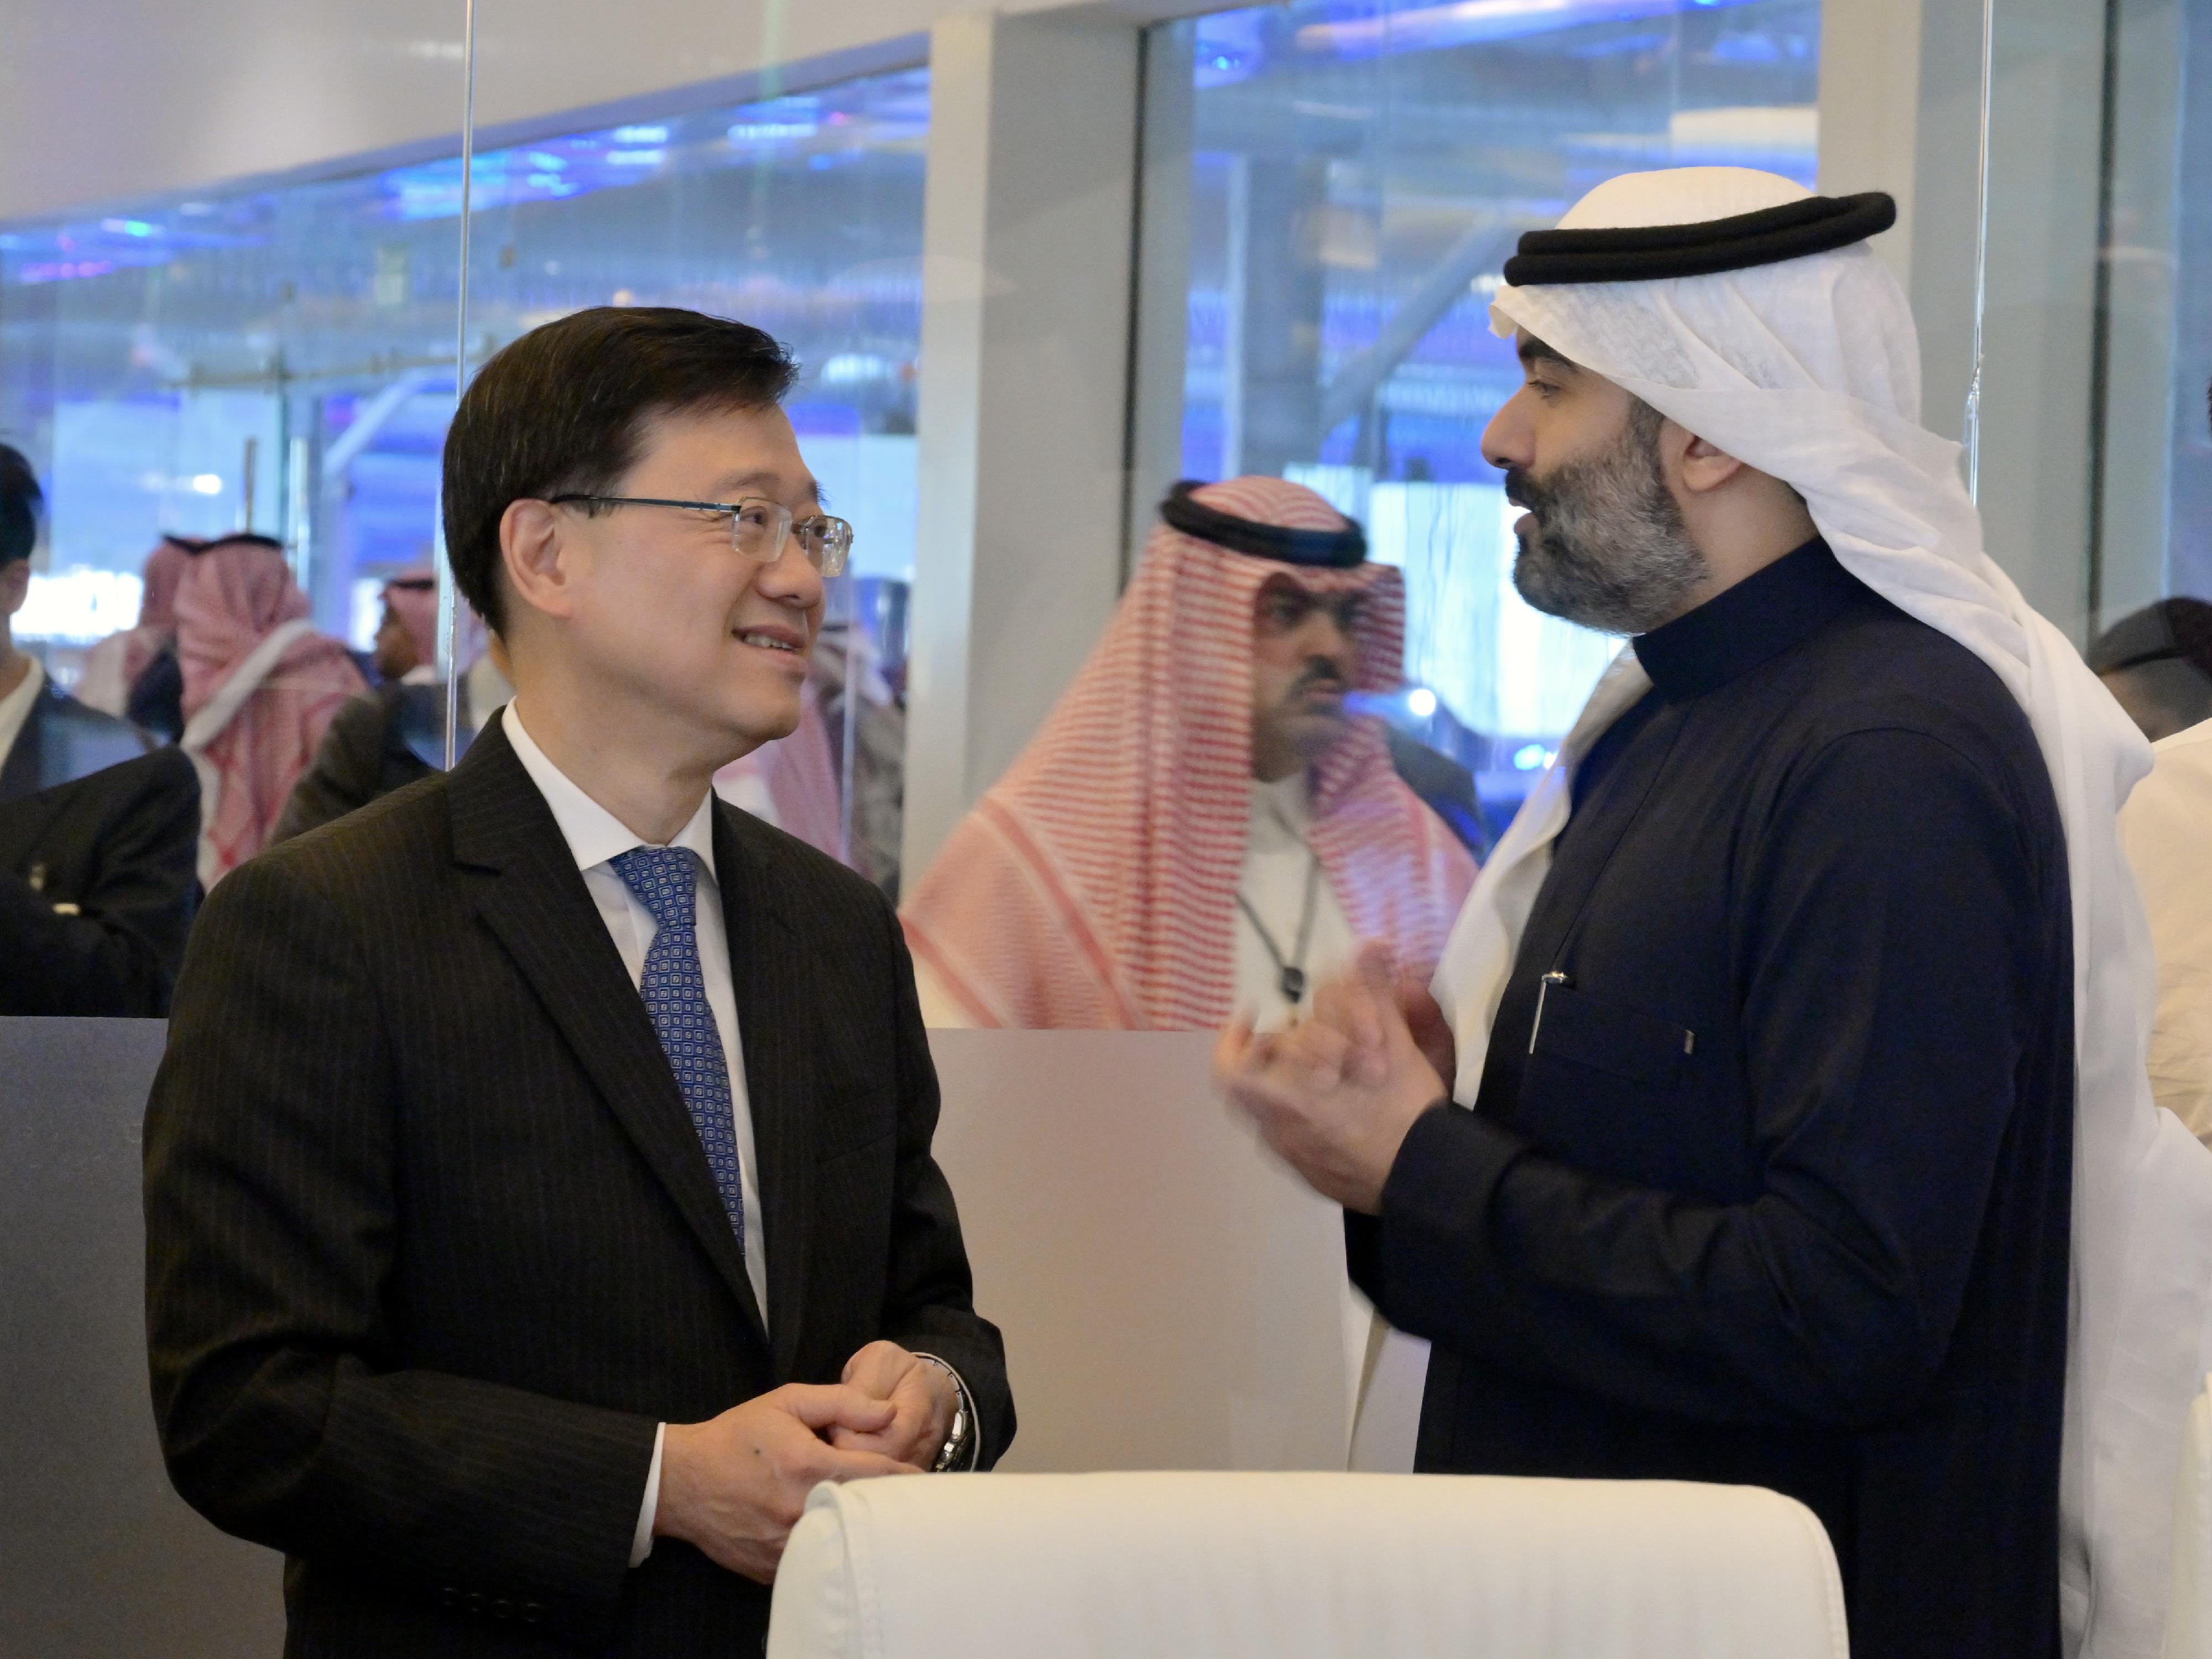 The Chief Executive, Mr John Lee (left), meets with the Minister of Communications and Information Technology of Saudi Arabia, Mr Abdullah Alswaha (right), in the LEAP 2023 technology conference, Riyadh, Saudi Arabia, today (February 6, Riyadh time).